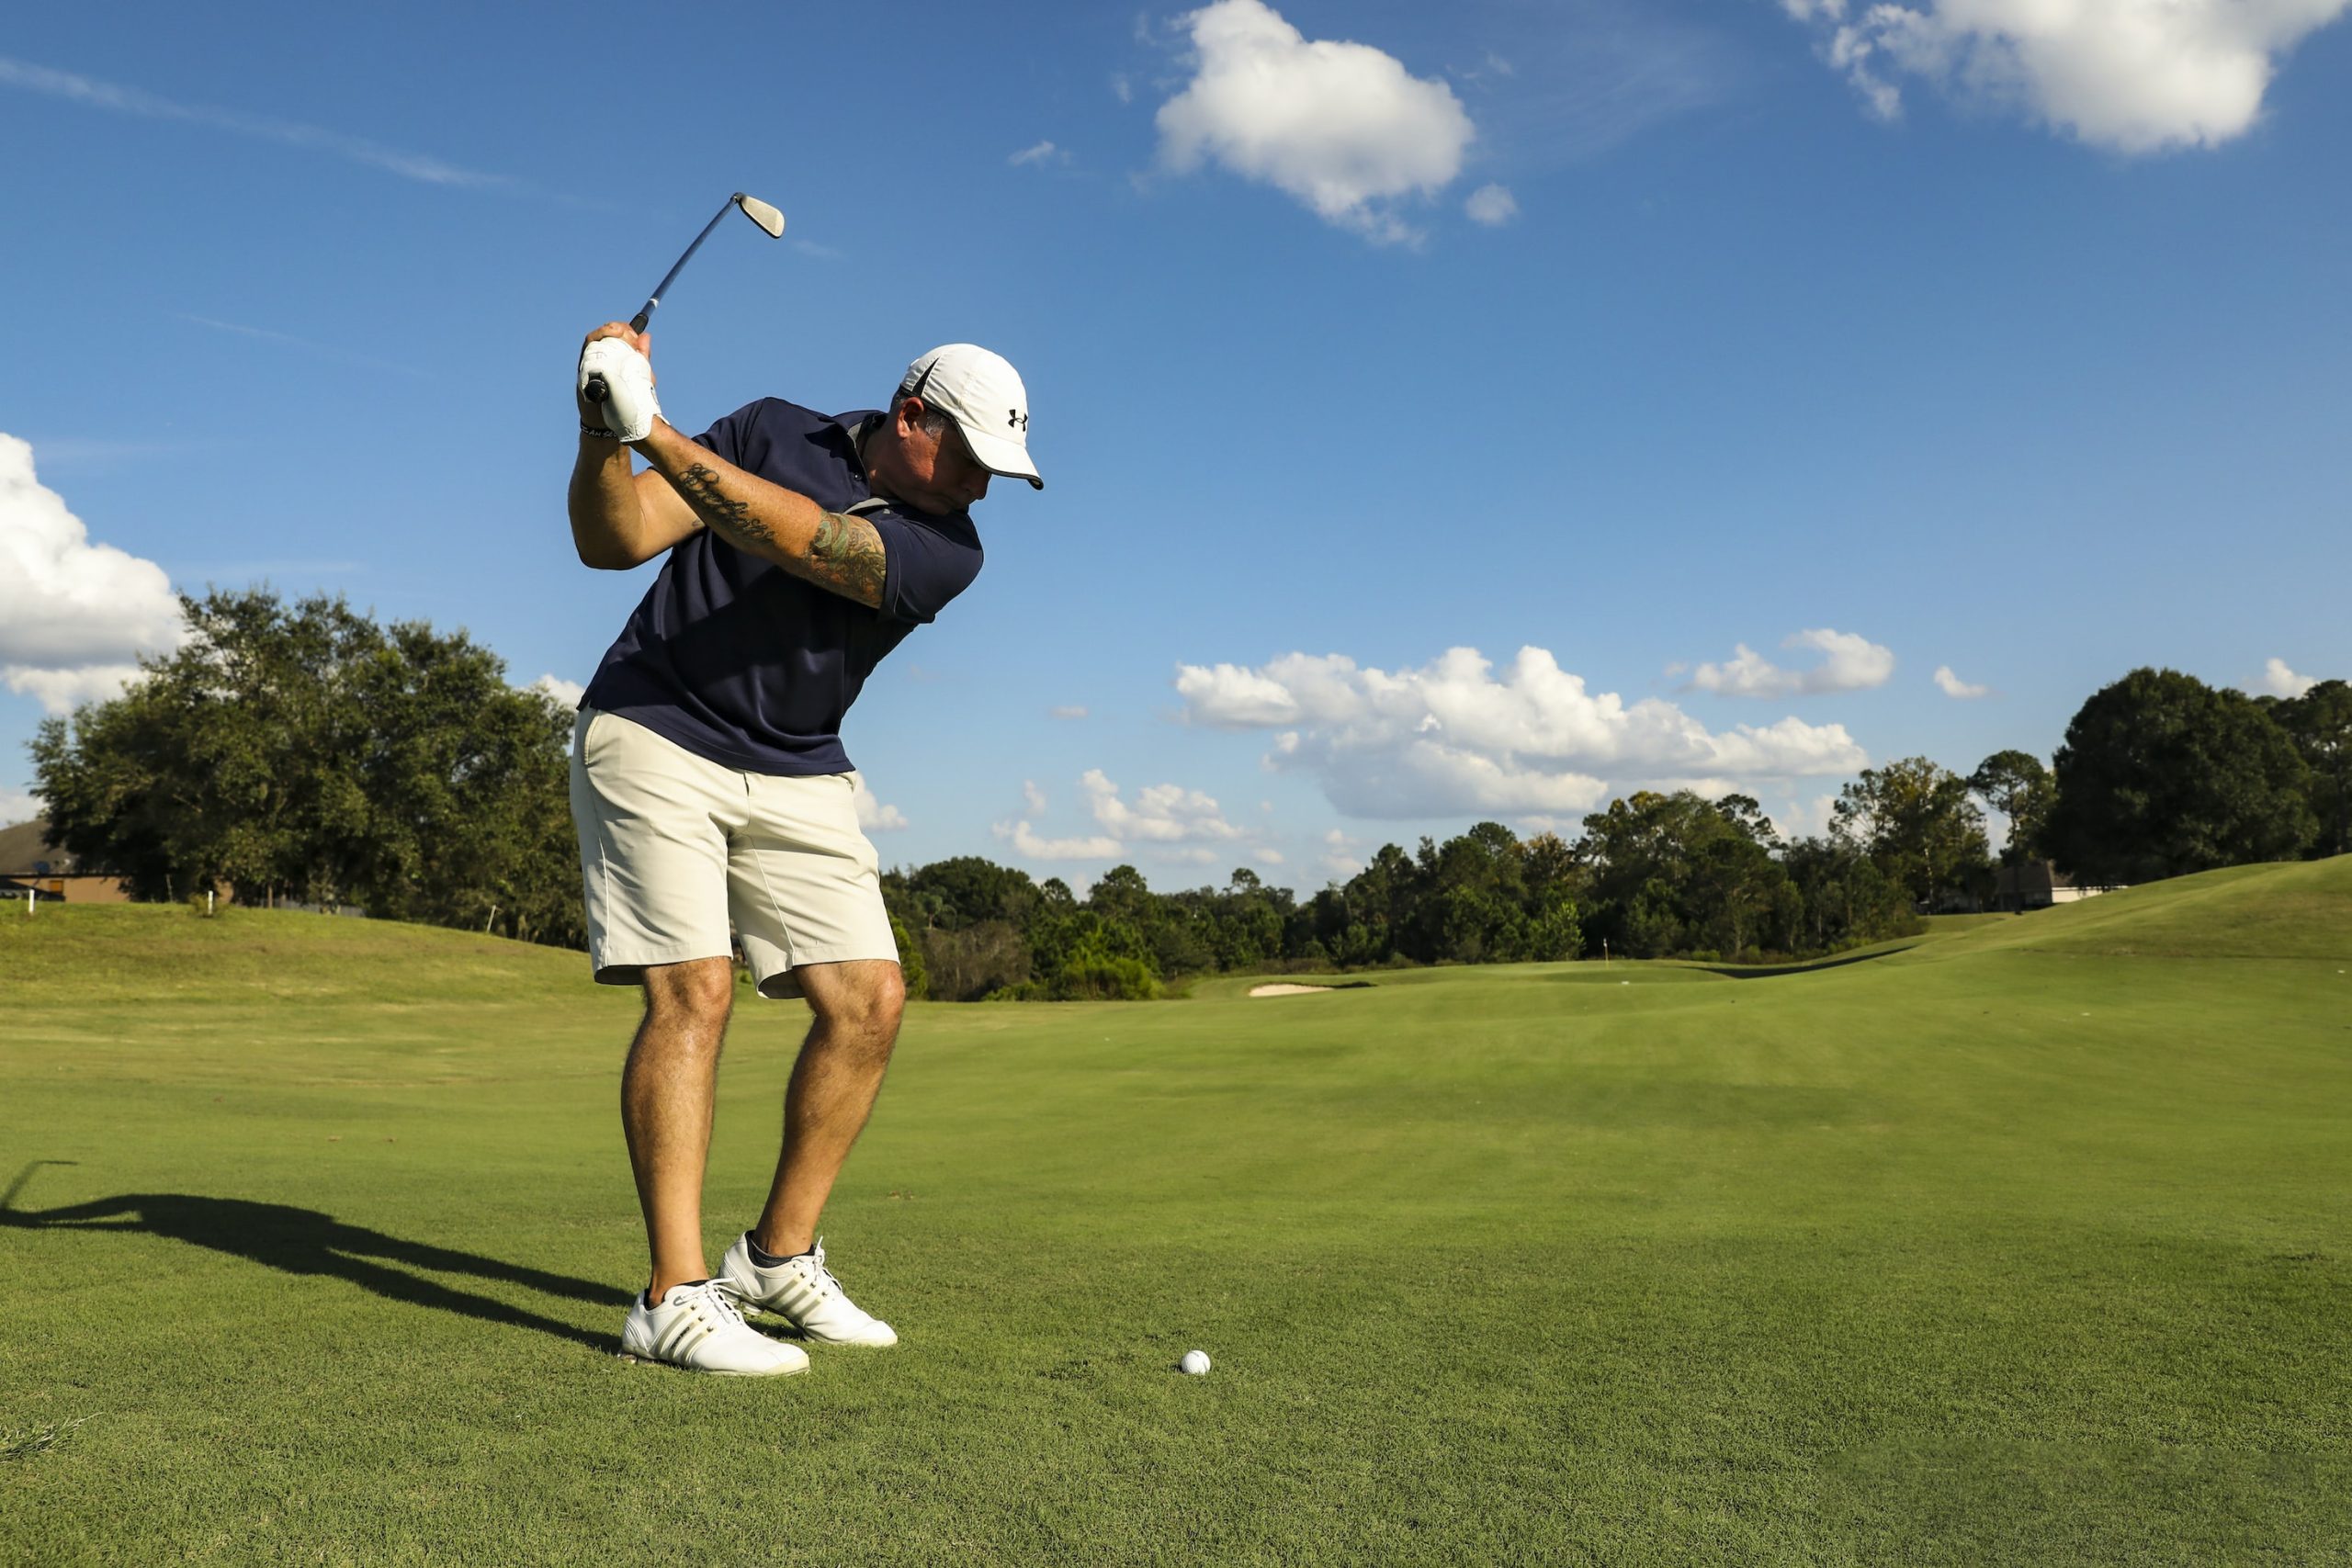 These 7 Ideas Will Take Your Golf Game to the Next Level - technique, physical conditioning, mental game, Lifestyle, golf cart, golf